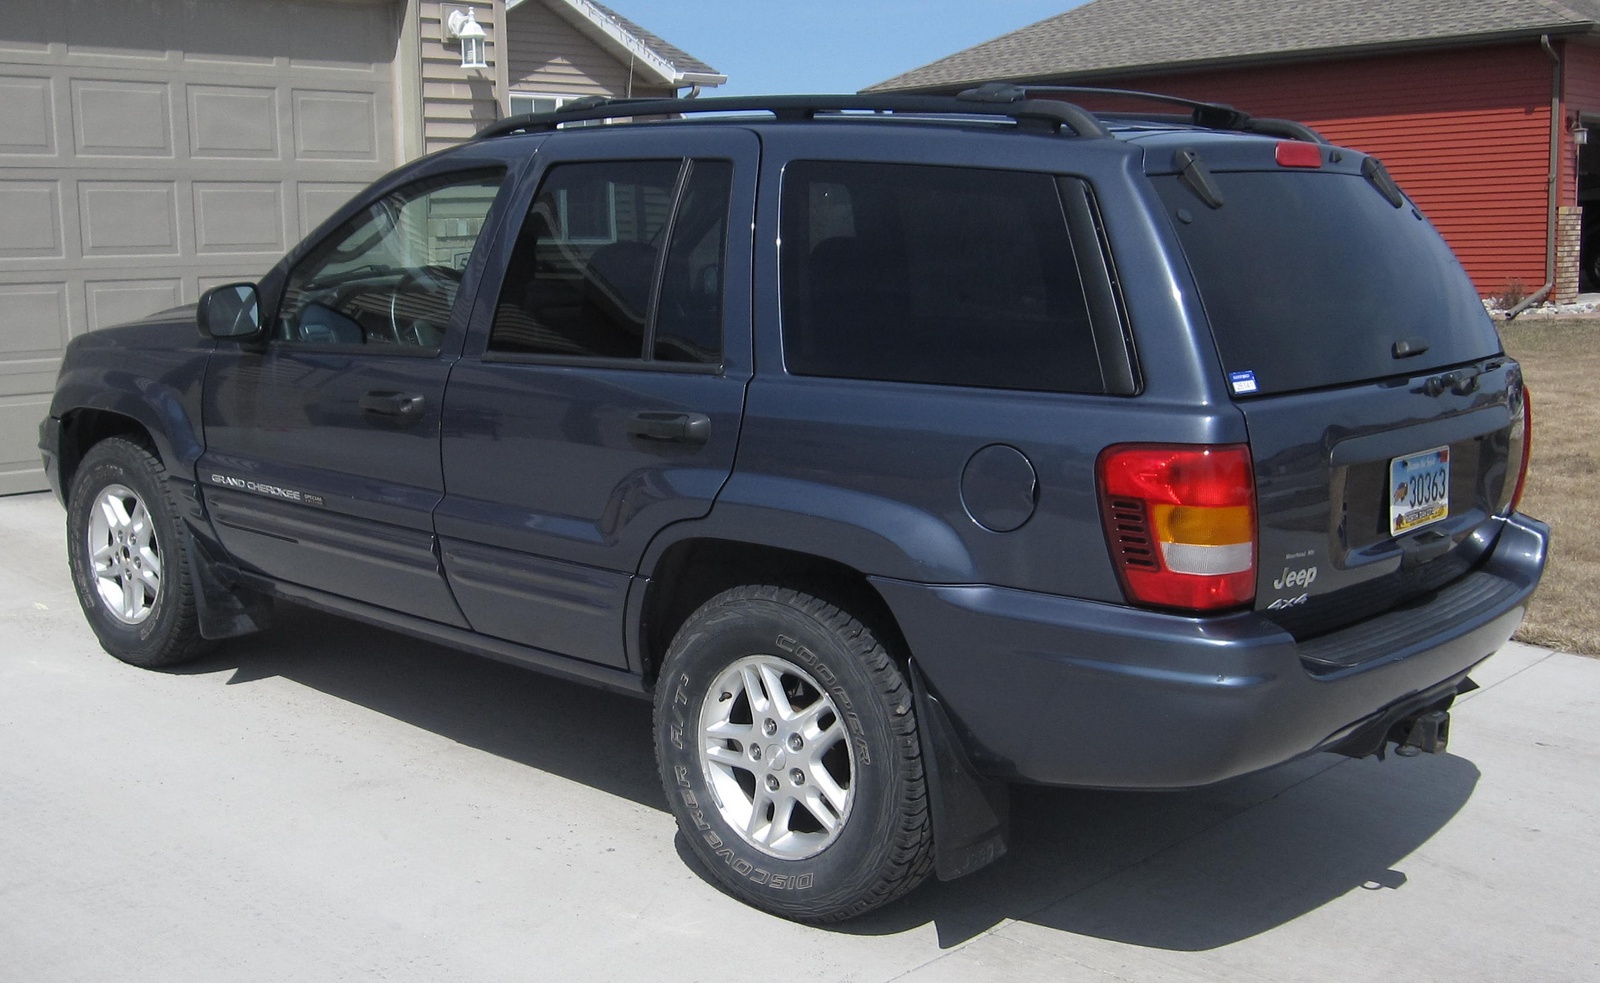 04 Jeep grand cherokee special edition specs